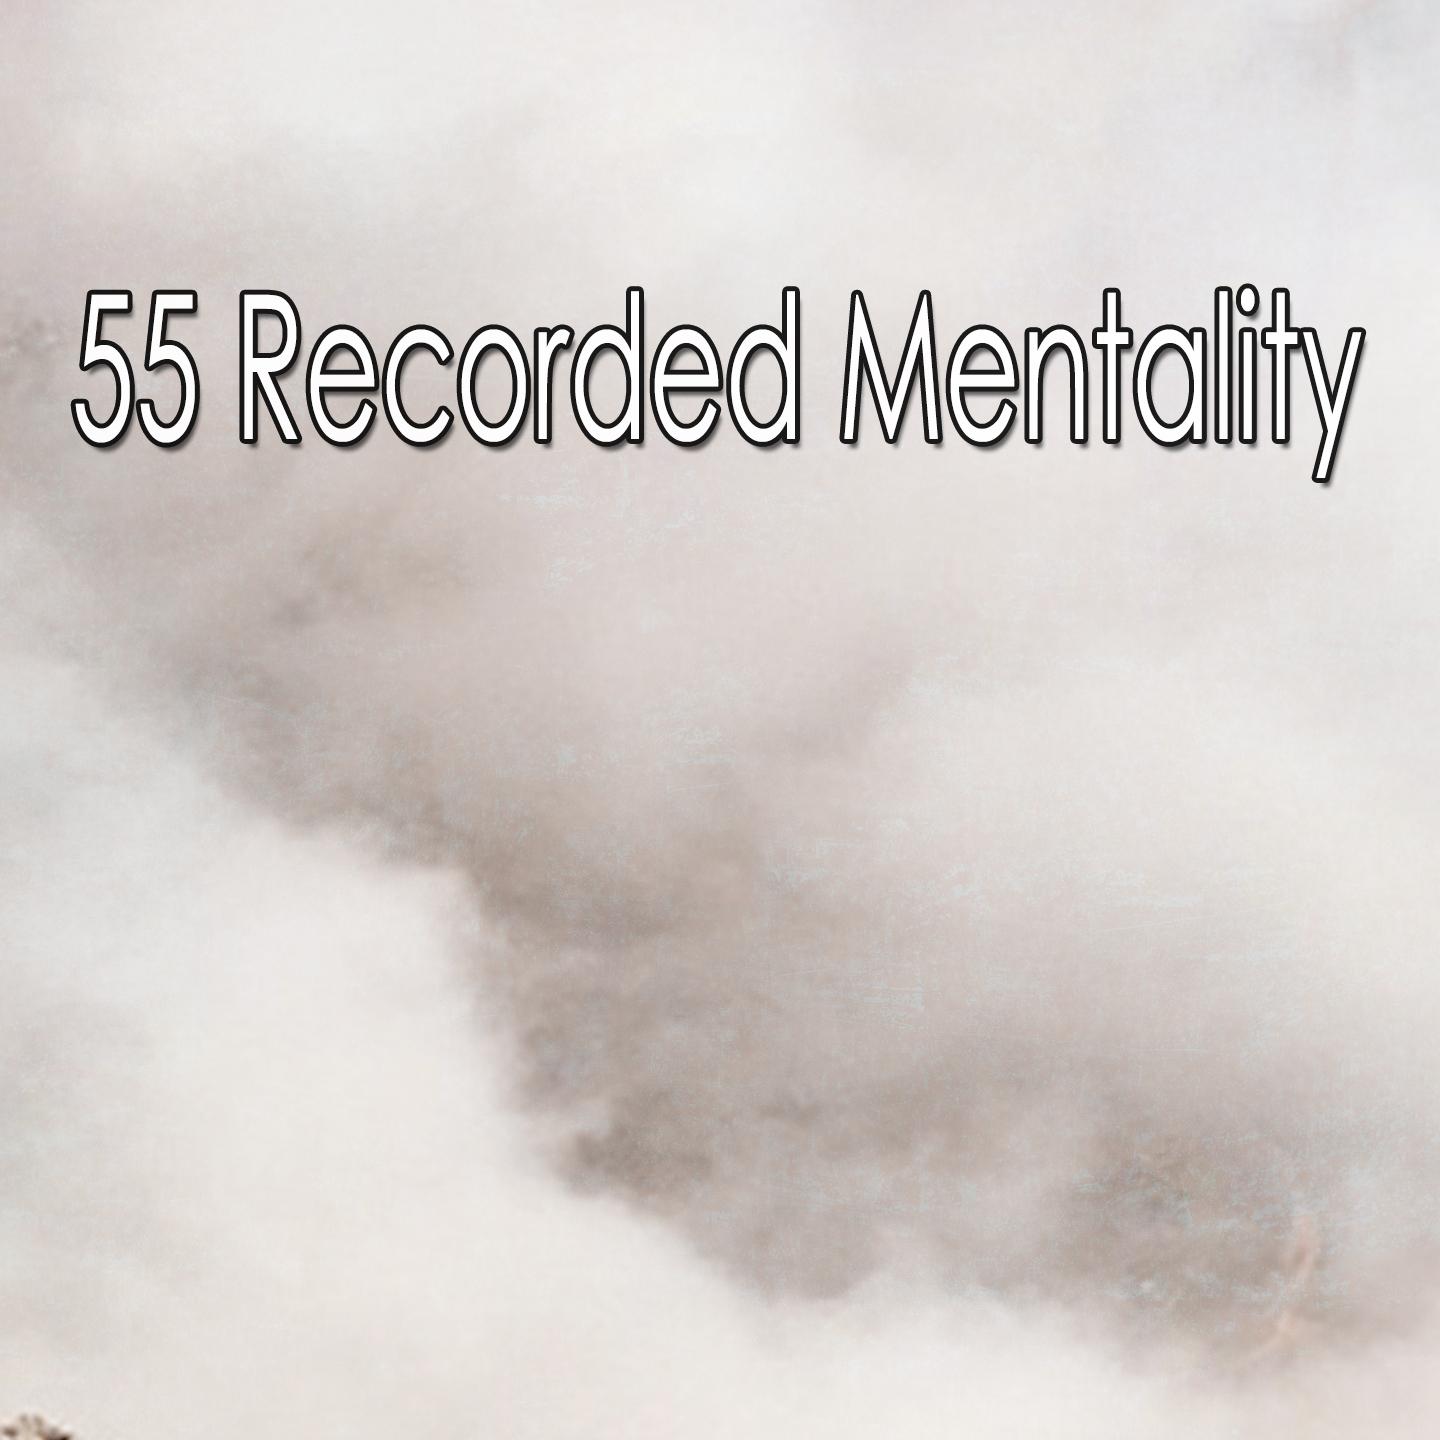 55 Recorded Mentality